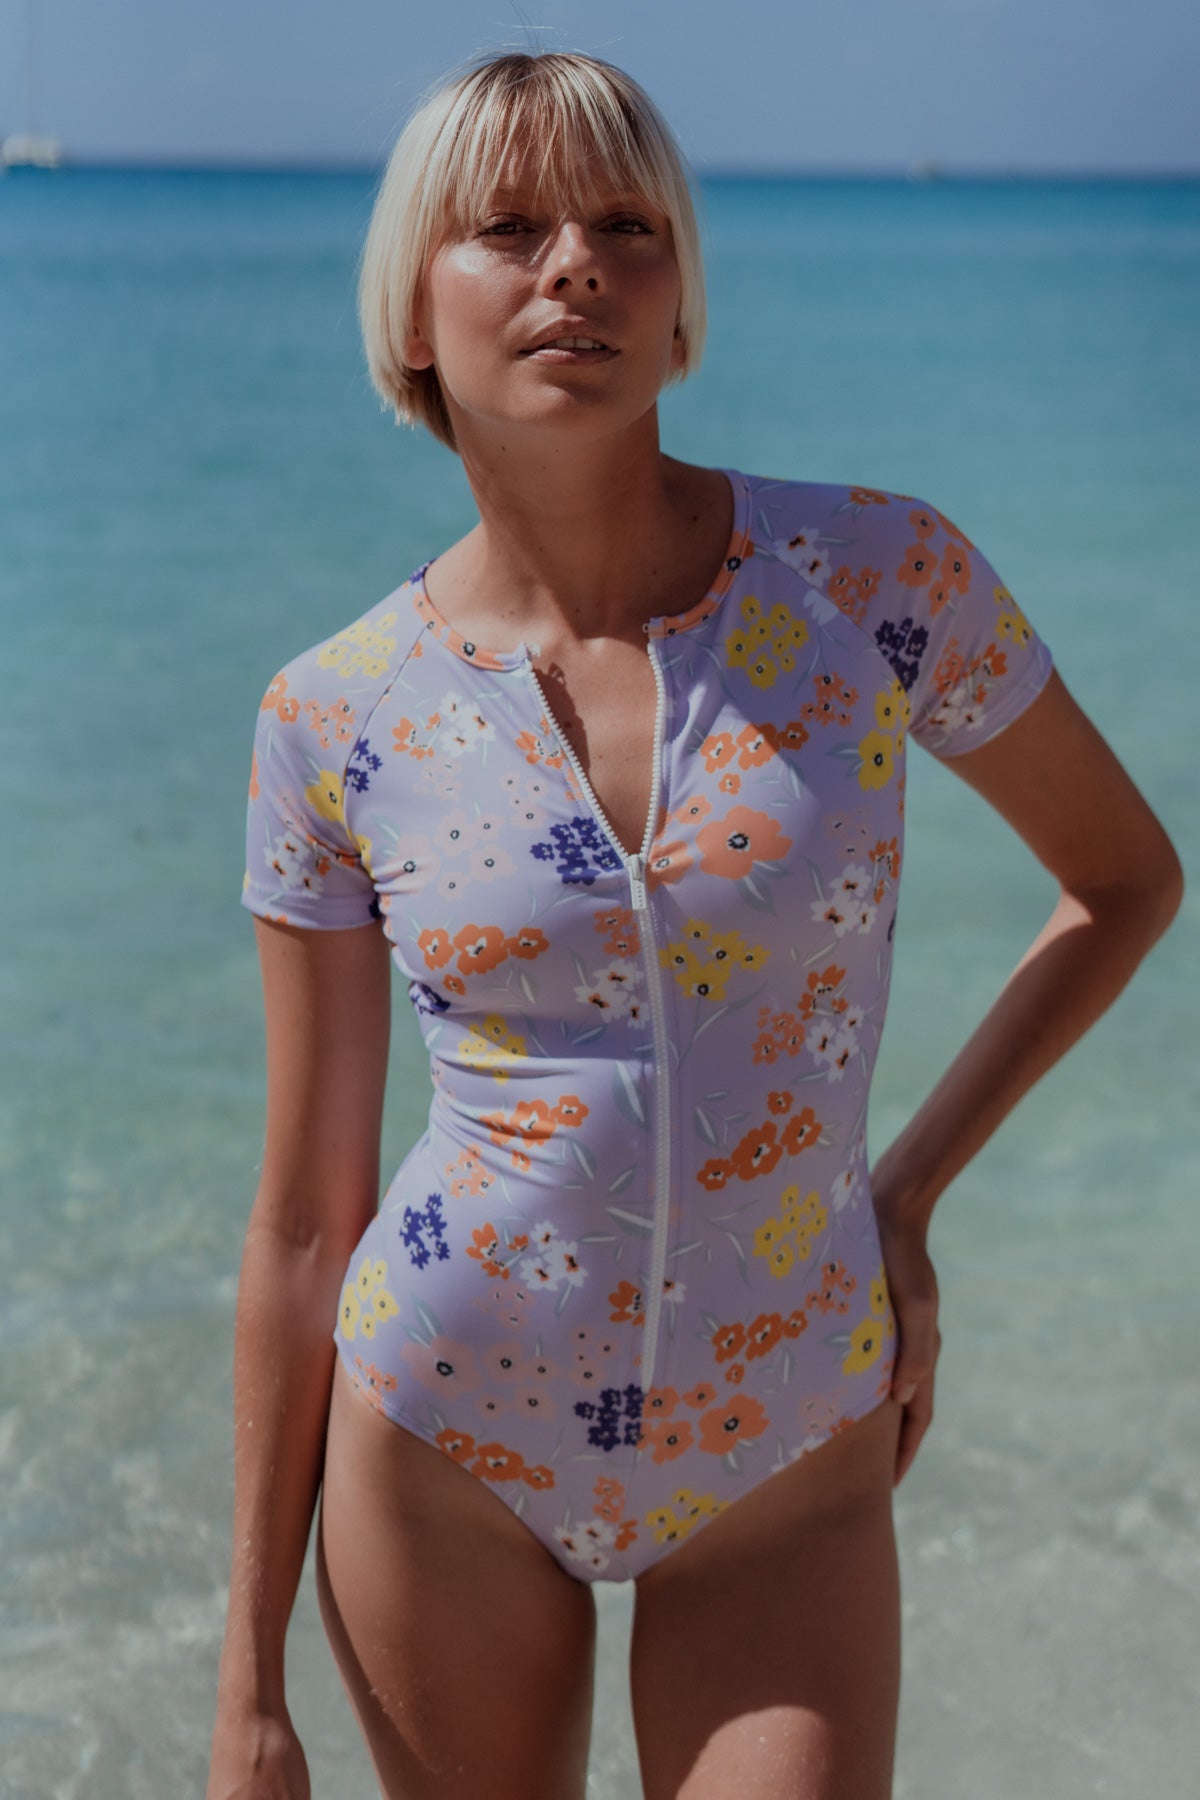 short sleeve swimsuit, short sleeve swimsuit Suppliers and Manufacturers at